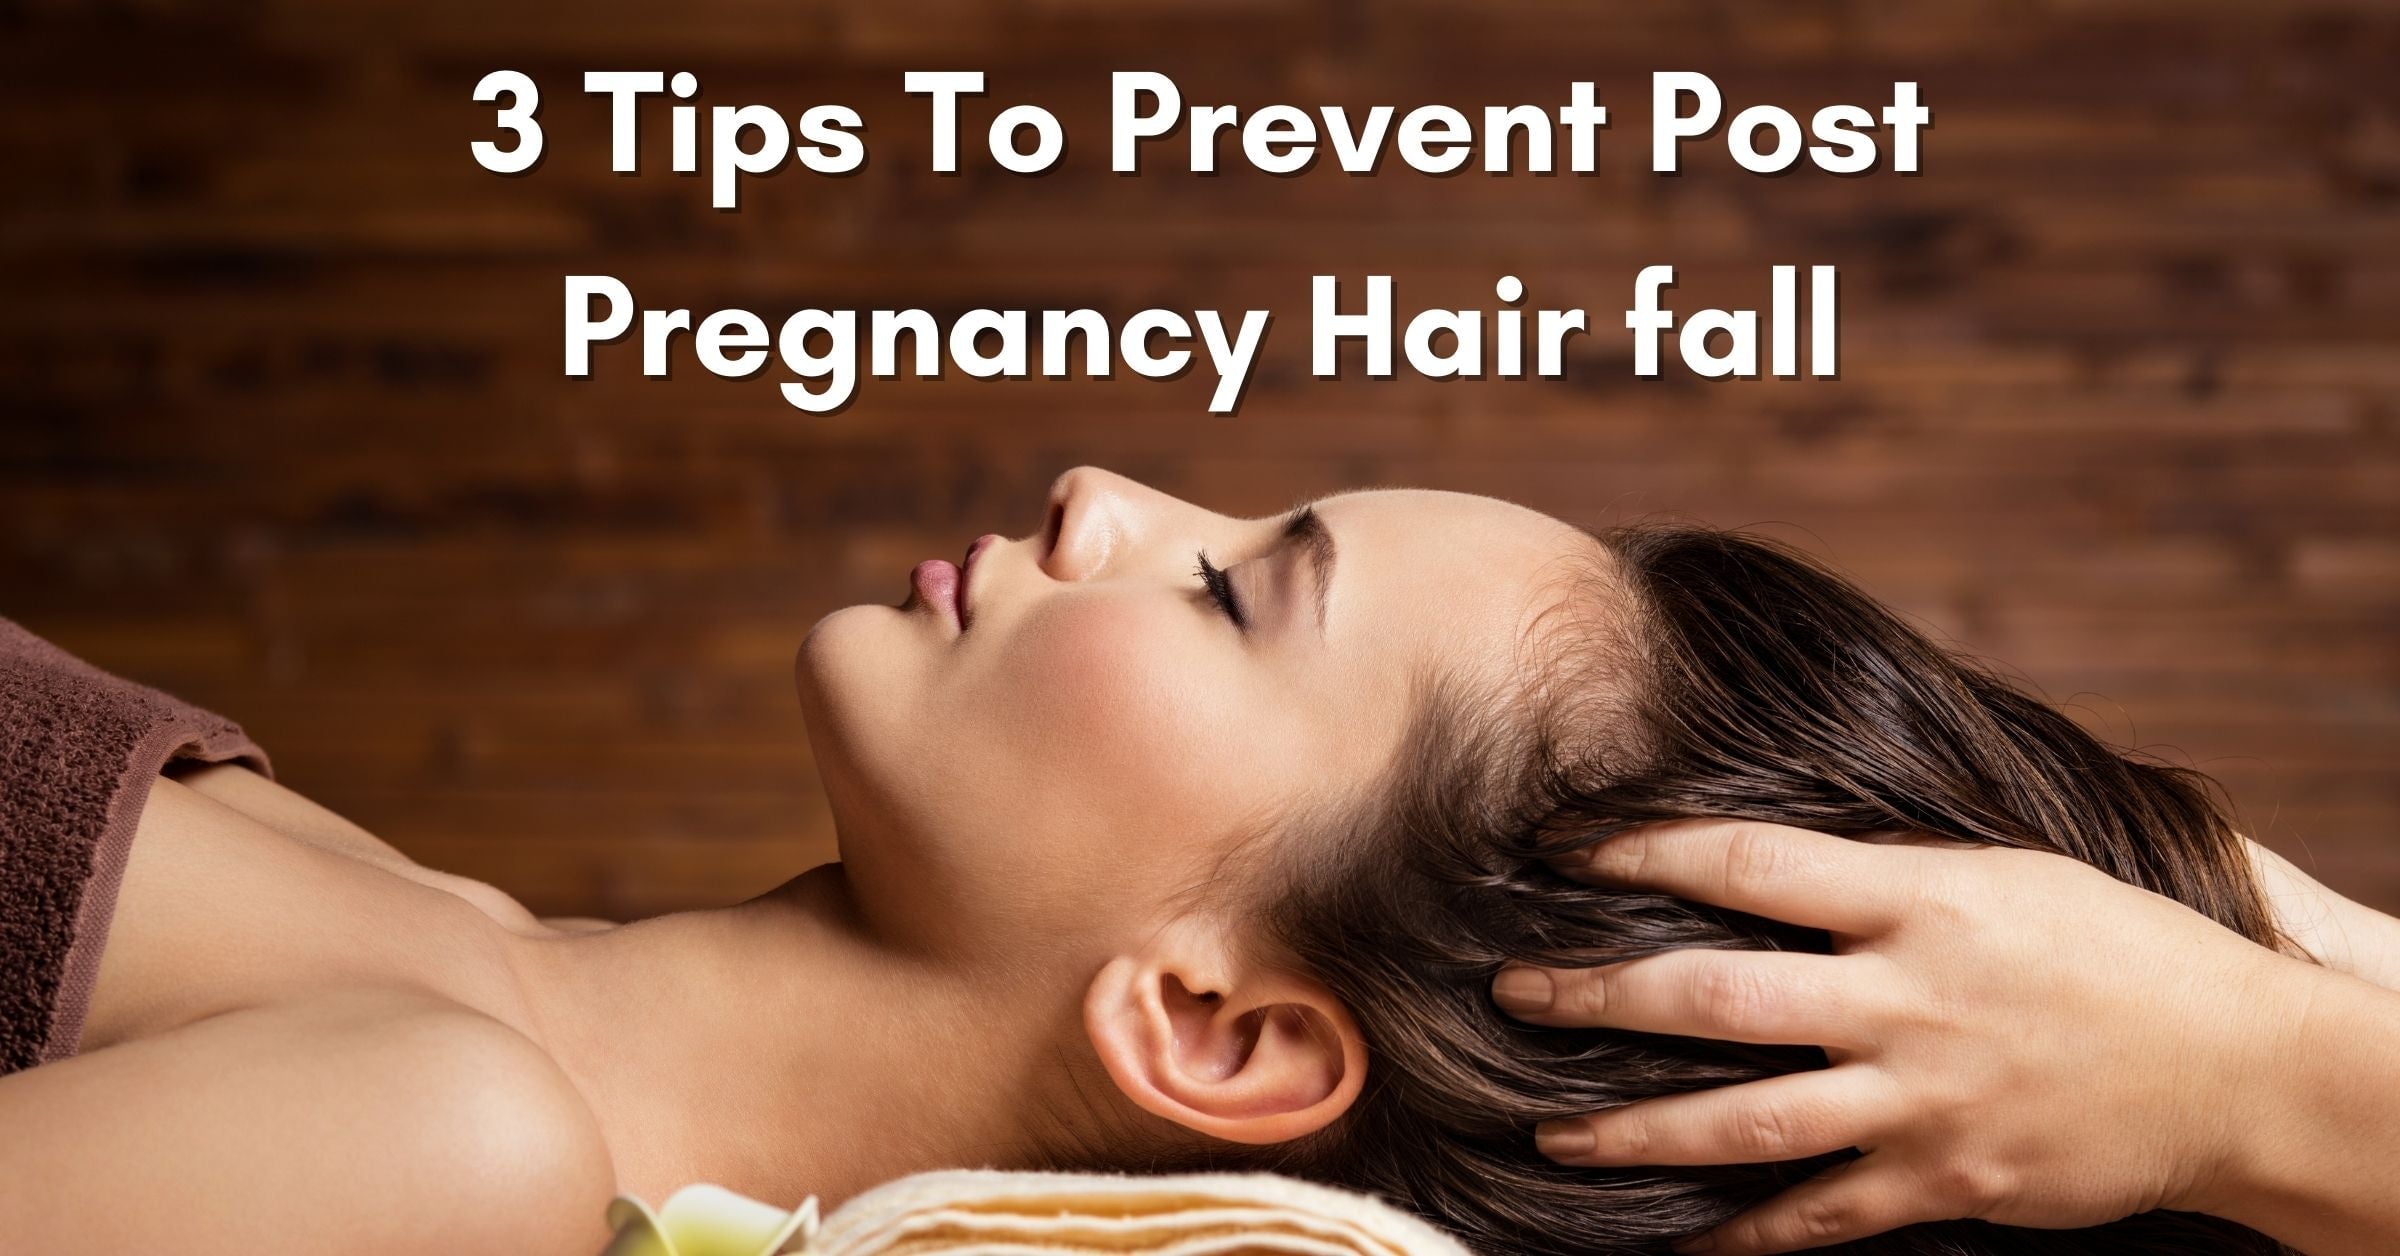 3 Tips To Prevent Post Pregnancy Hairfall